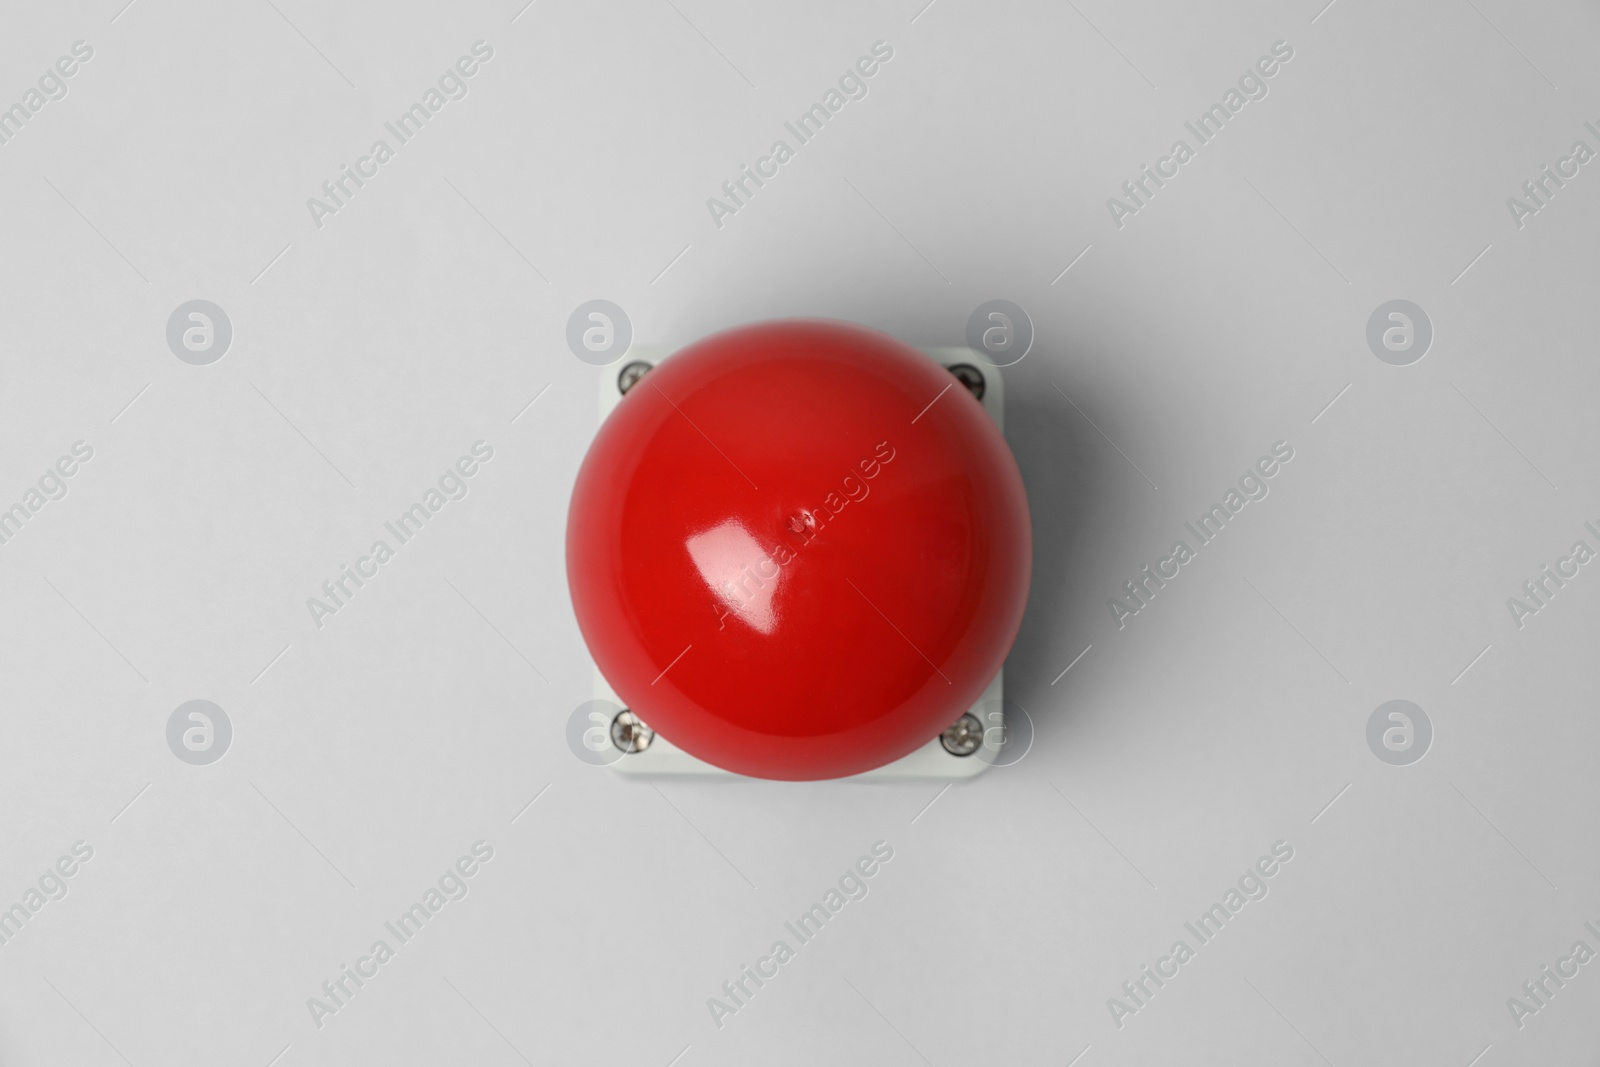 Photo of Red button of nuclear weapon on light gray background, top view. War concept